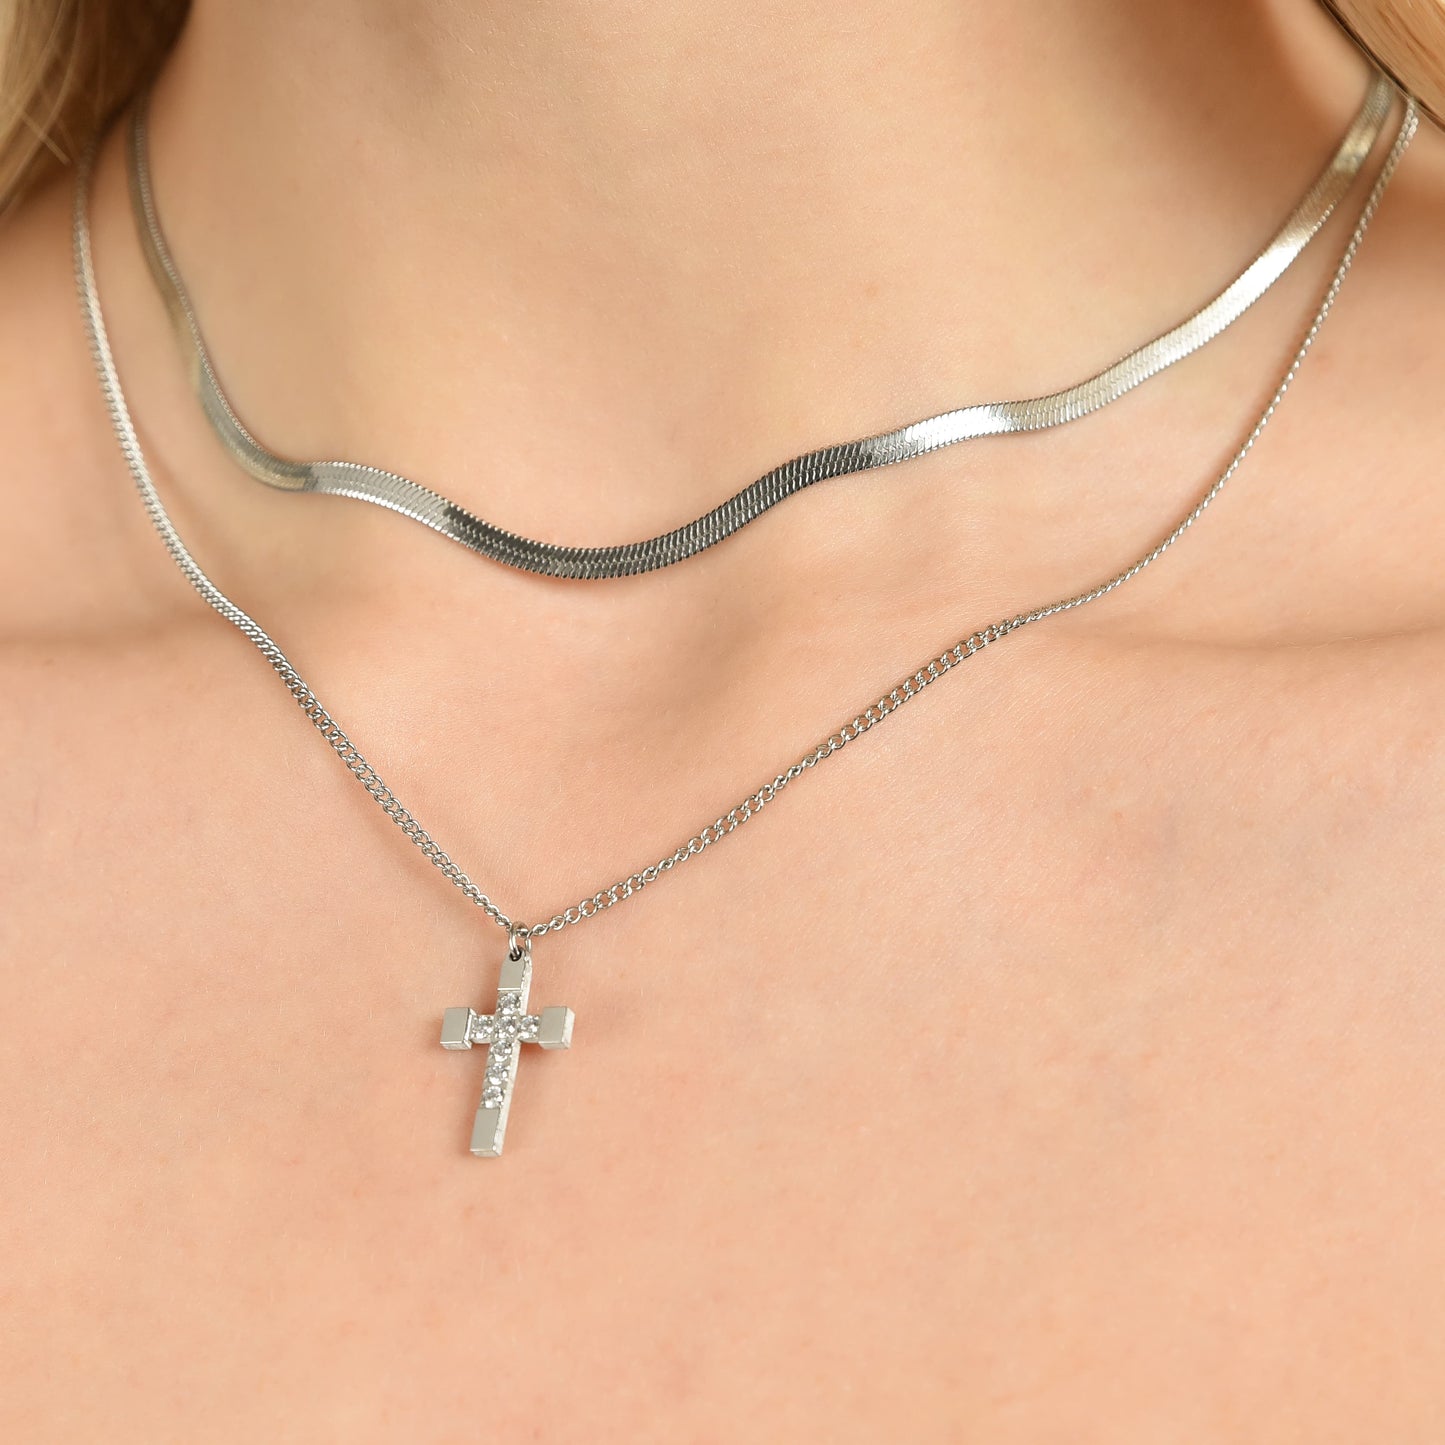 WOMEN'S STEEL CROSS NECKLACE WITH WHITE CRYSTALS